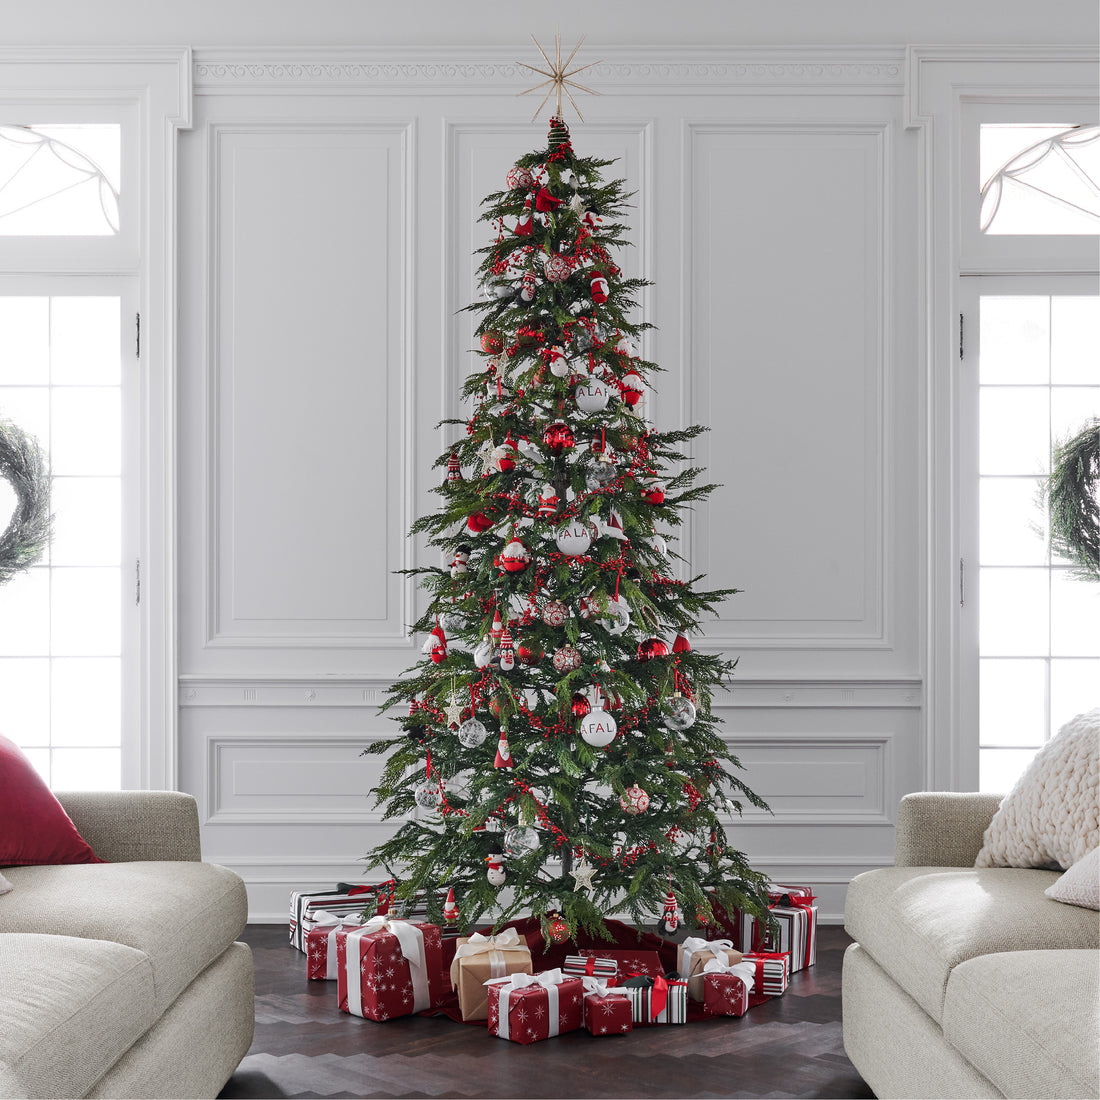 How to Decorate for the Holidays Using Ornaments